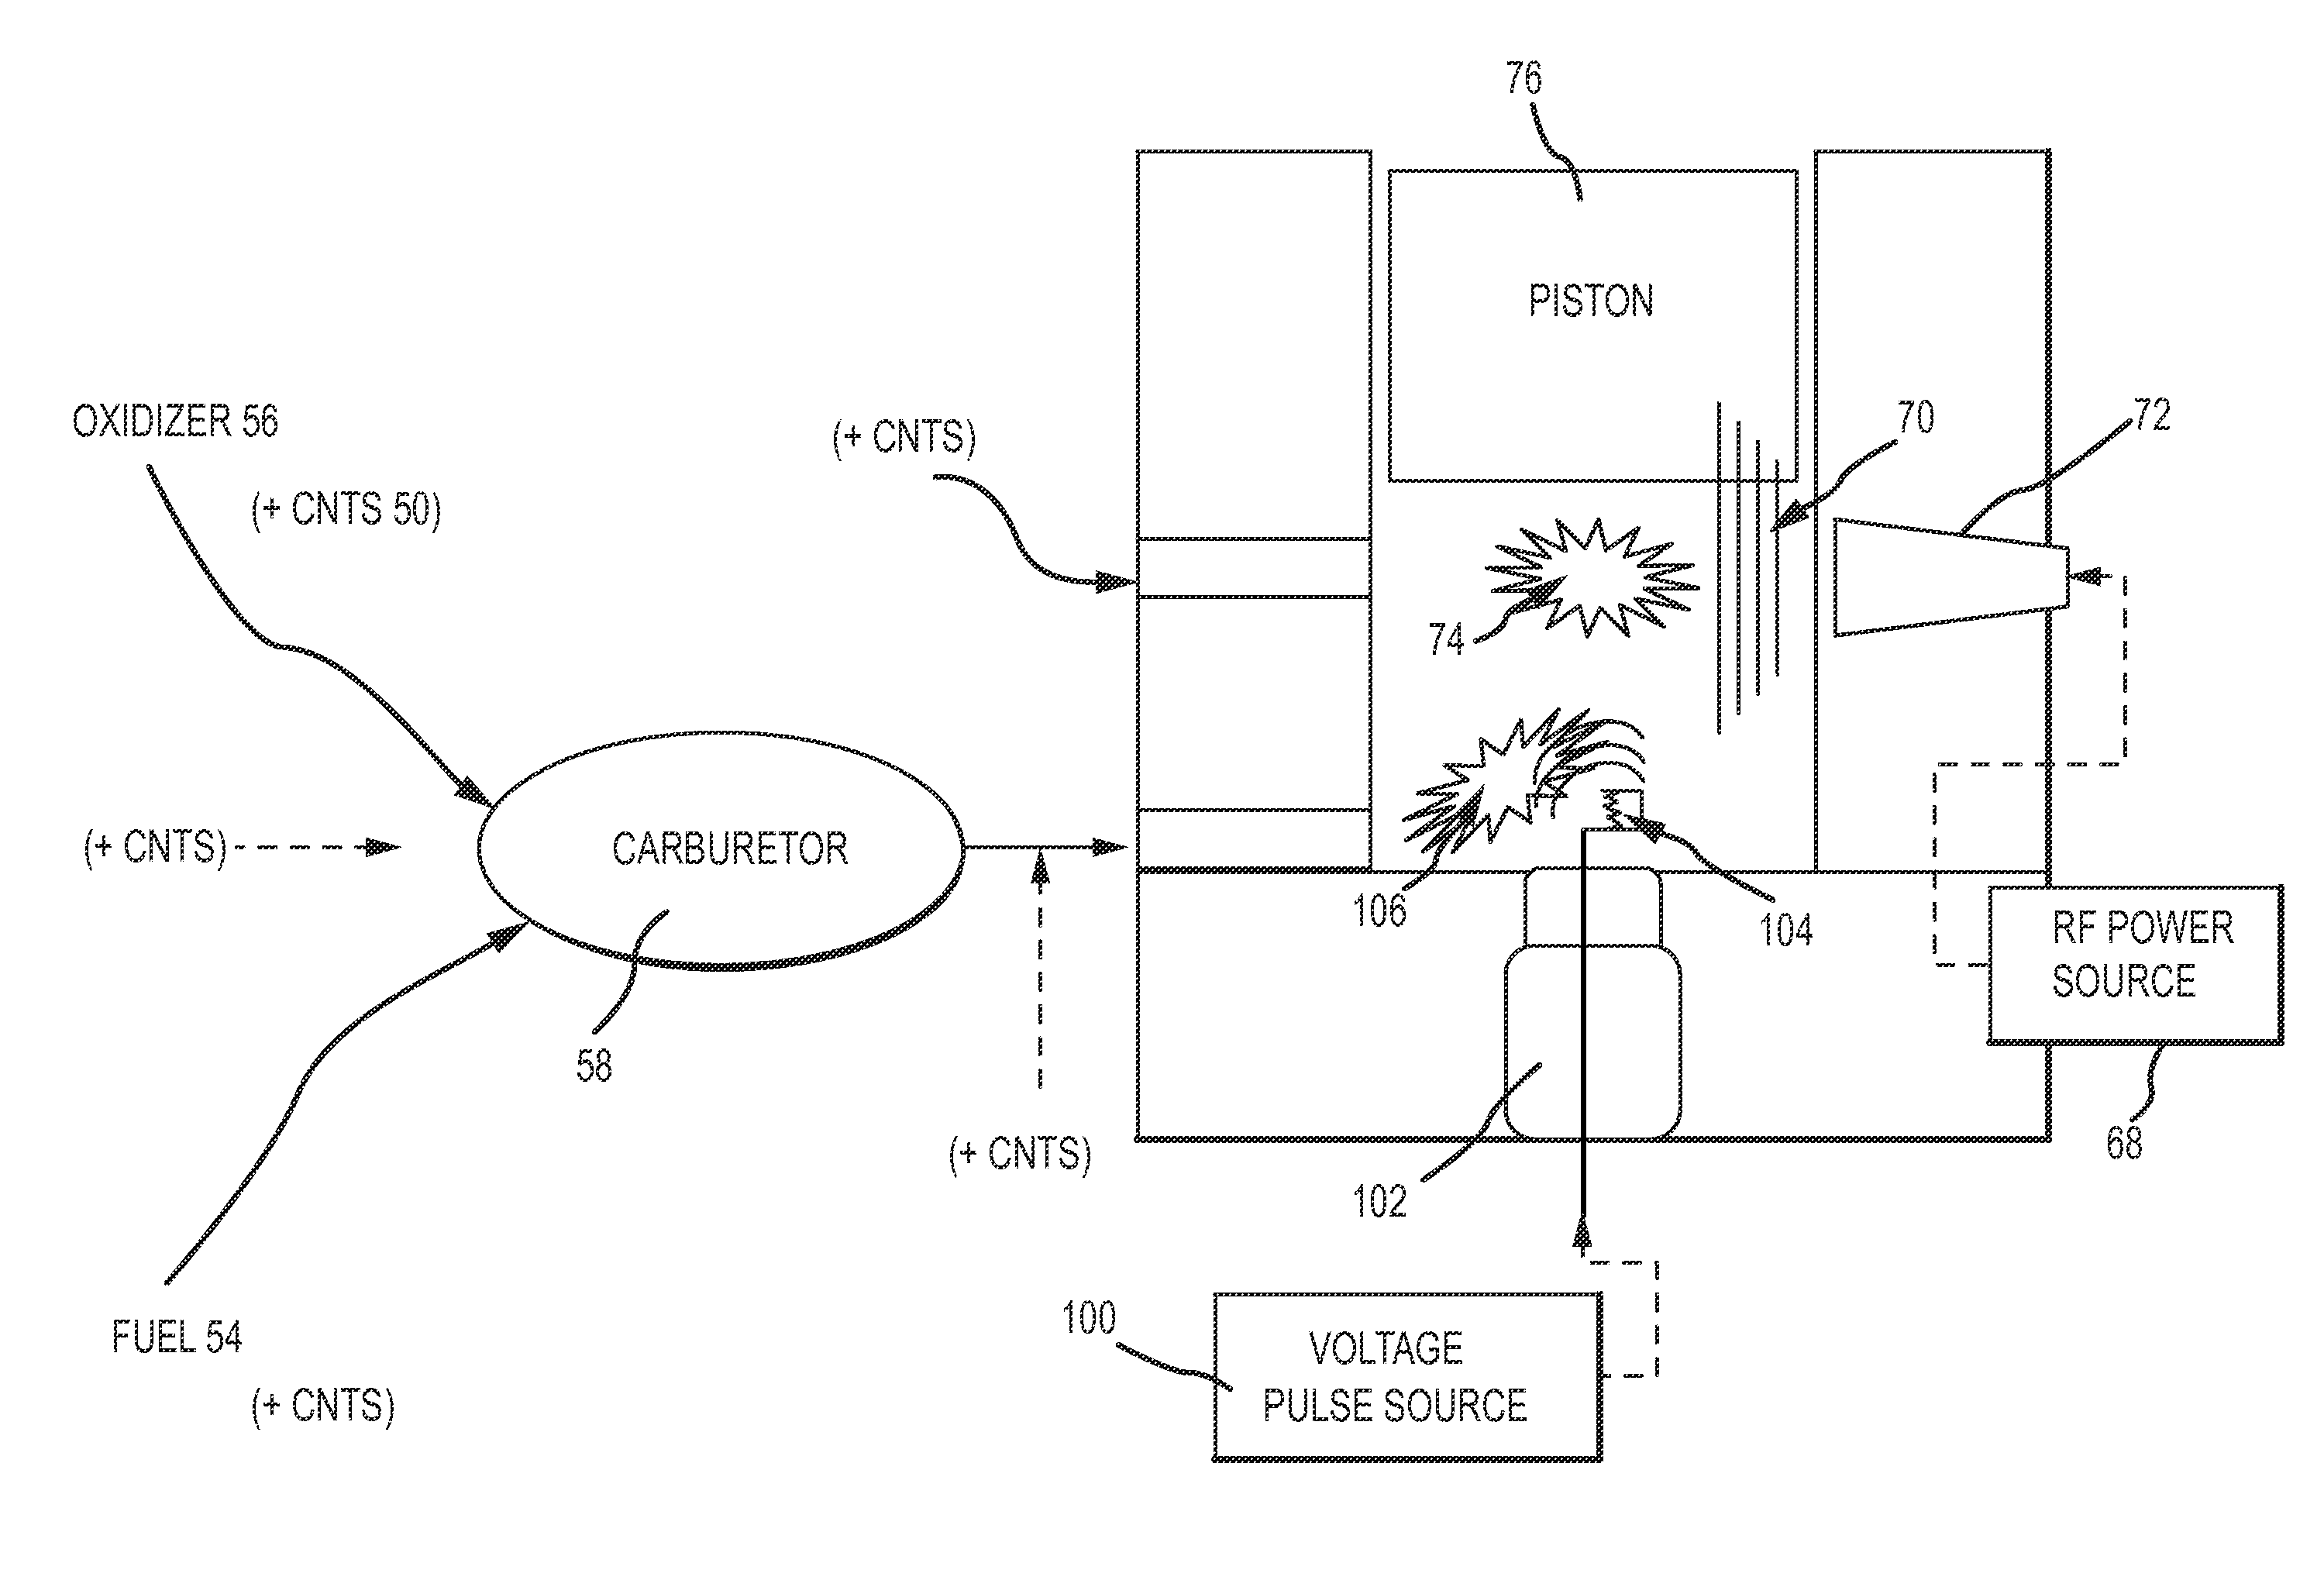 Method and Apparatus for improved internal combustion of fuel/oxidizer mixtures by nanostructure injection and electromagnetic pulse ignition